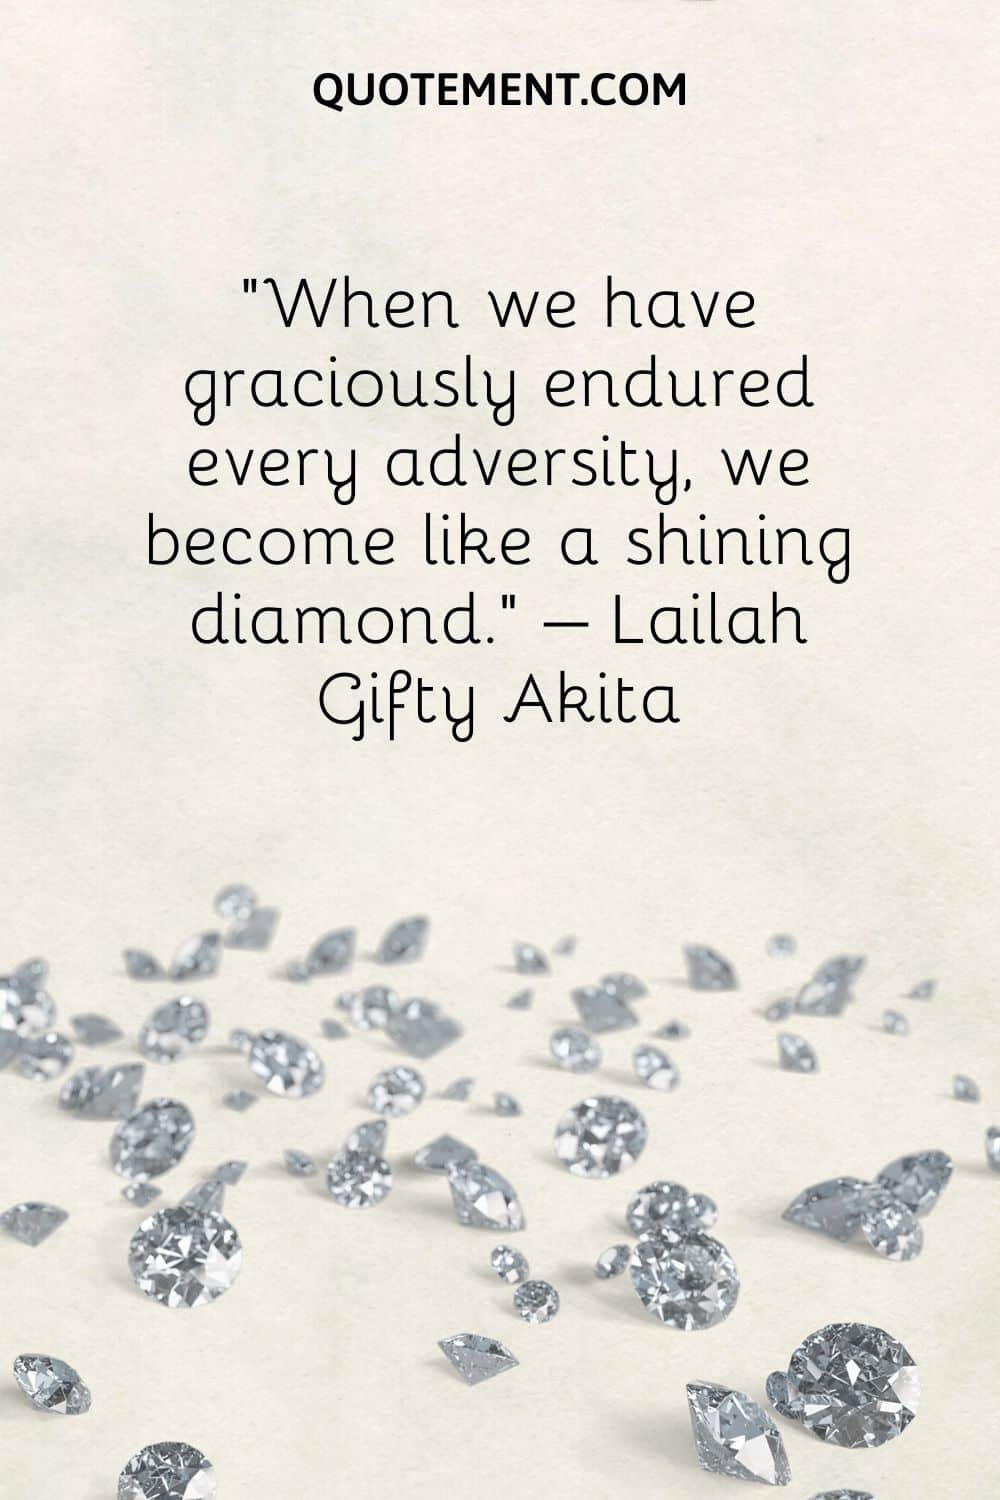 When we have graciously endured every adversity, we become like a shining diamond